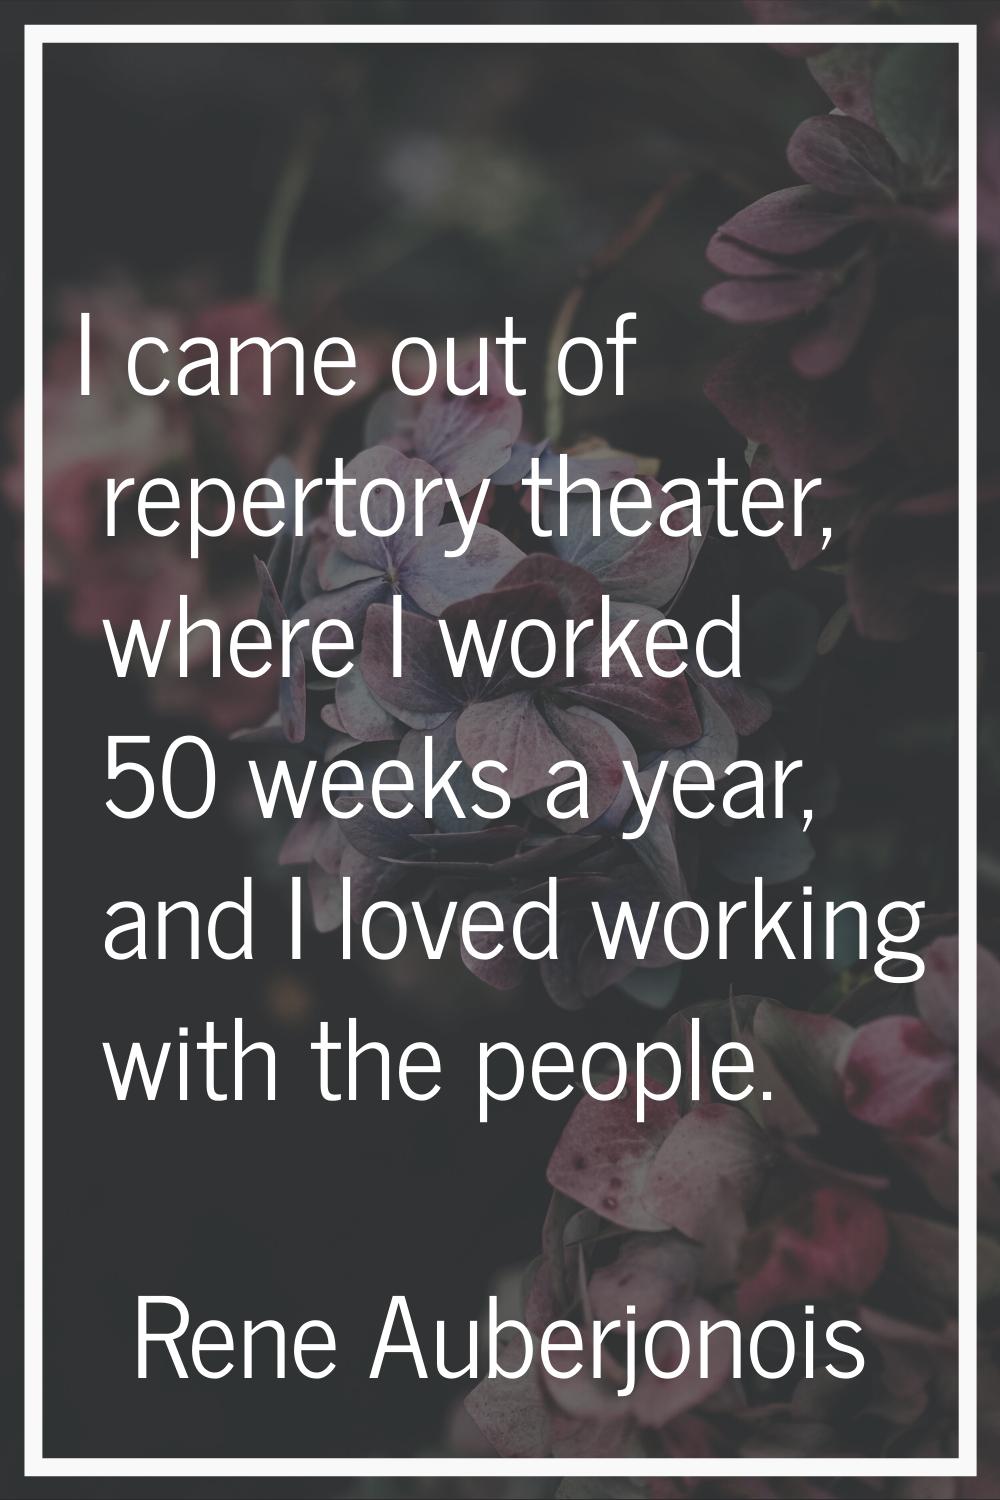 I came out of repertory theater, where I worked 50 weeks a year, and I loved working with the peopl